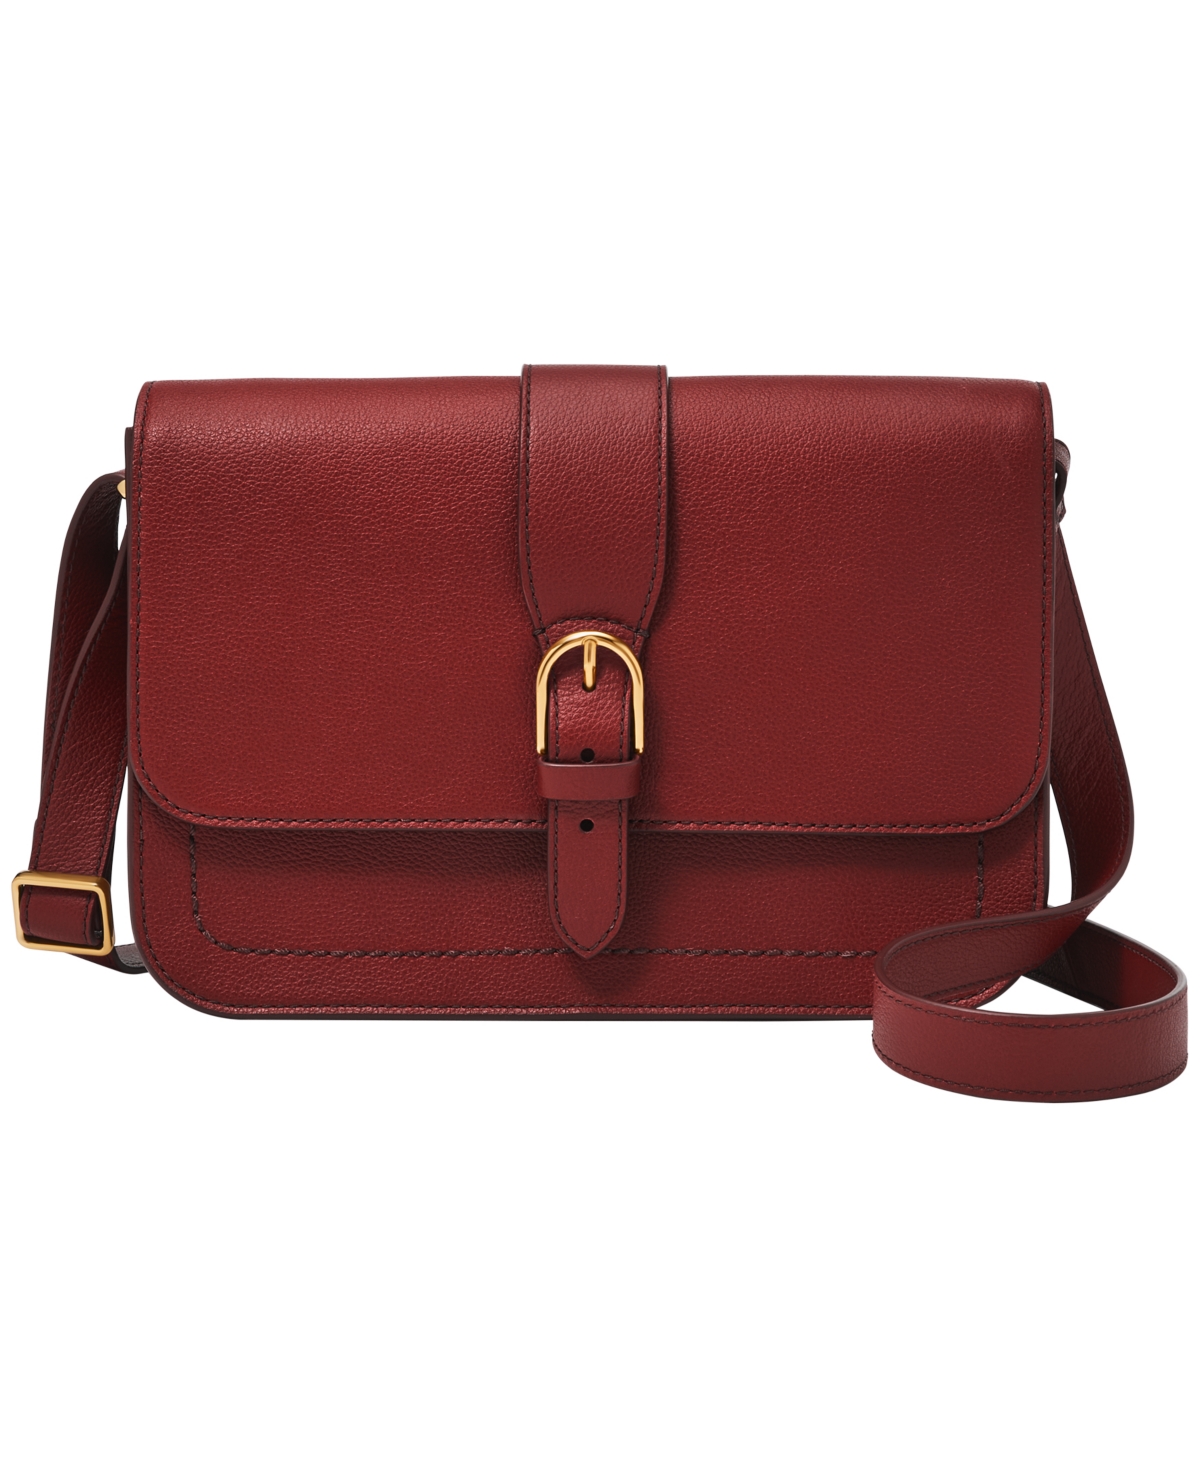 Fossil Zoey Leather Crossbody Bag In Scarlet